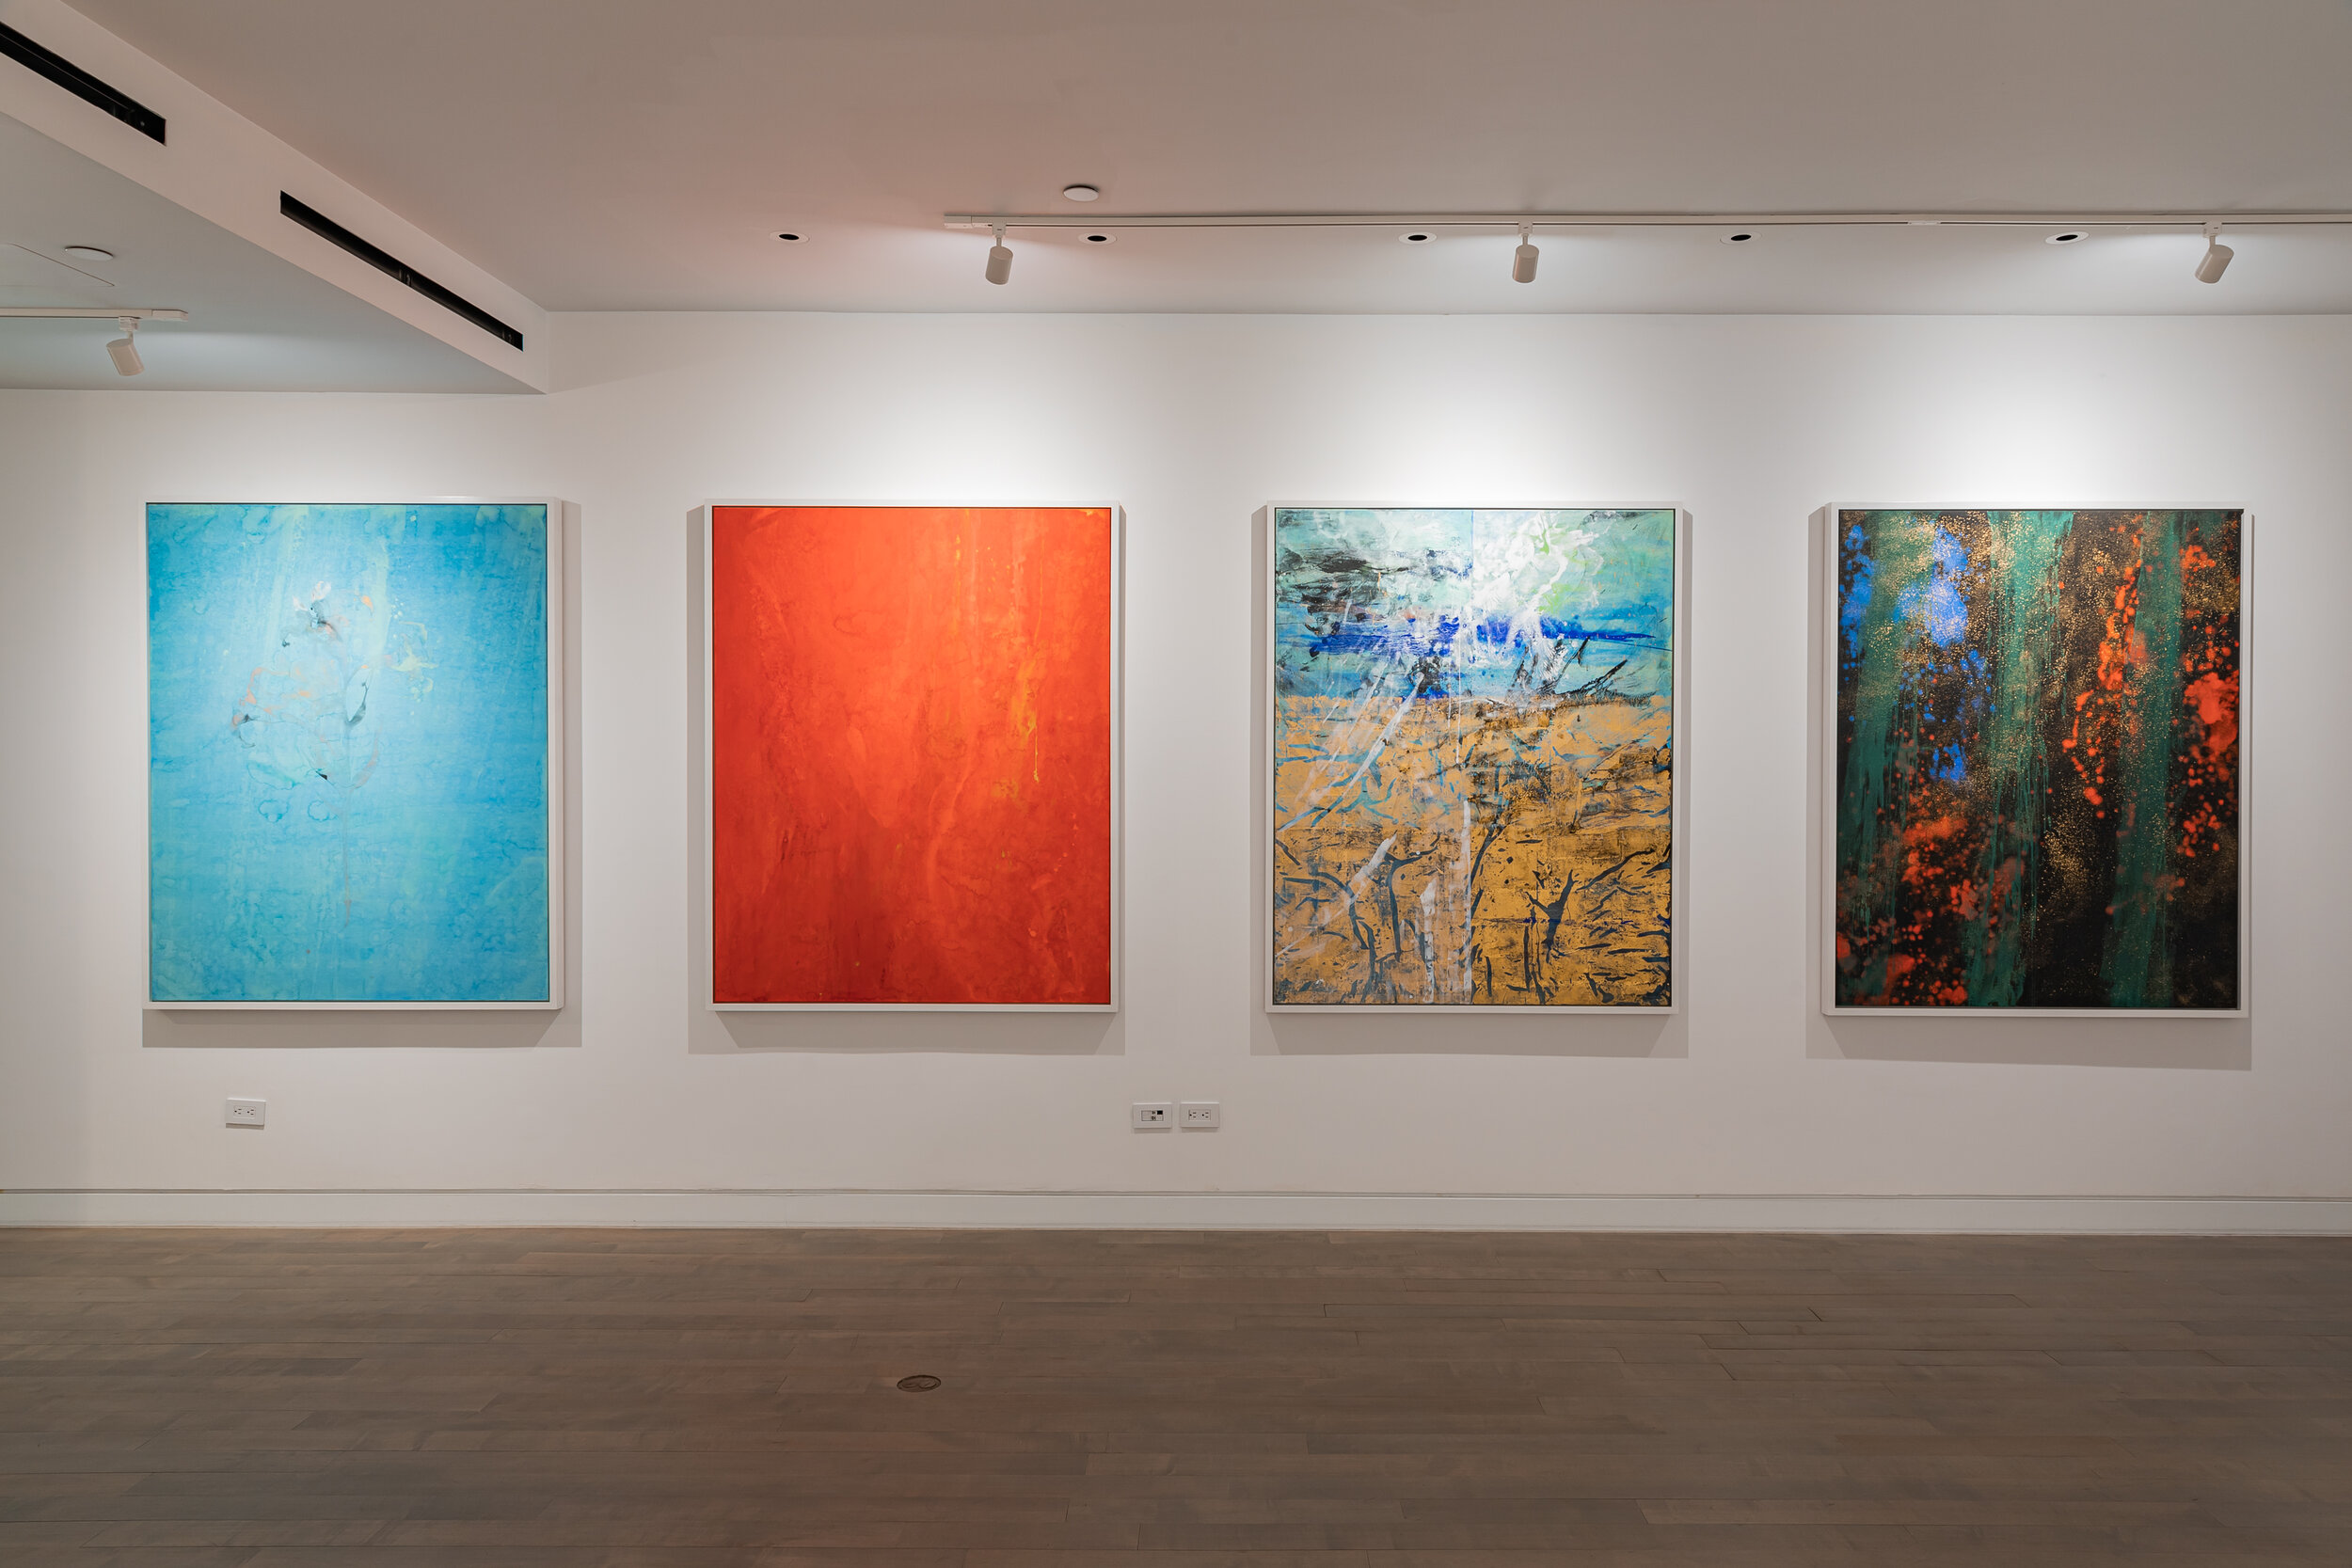   The Art of the Gospels  Exhibition at Waterfall Gallery 